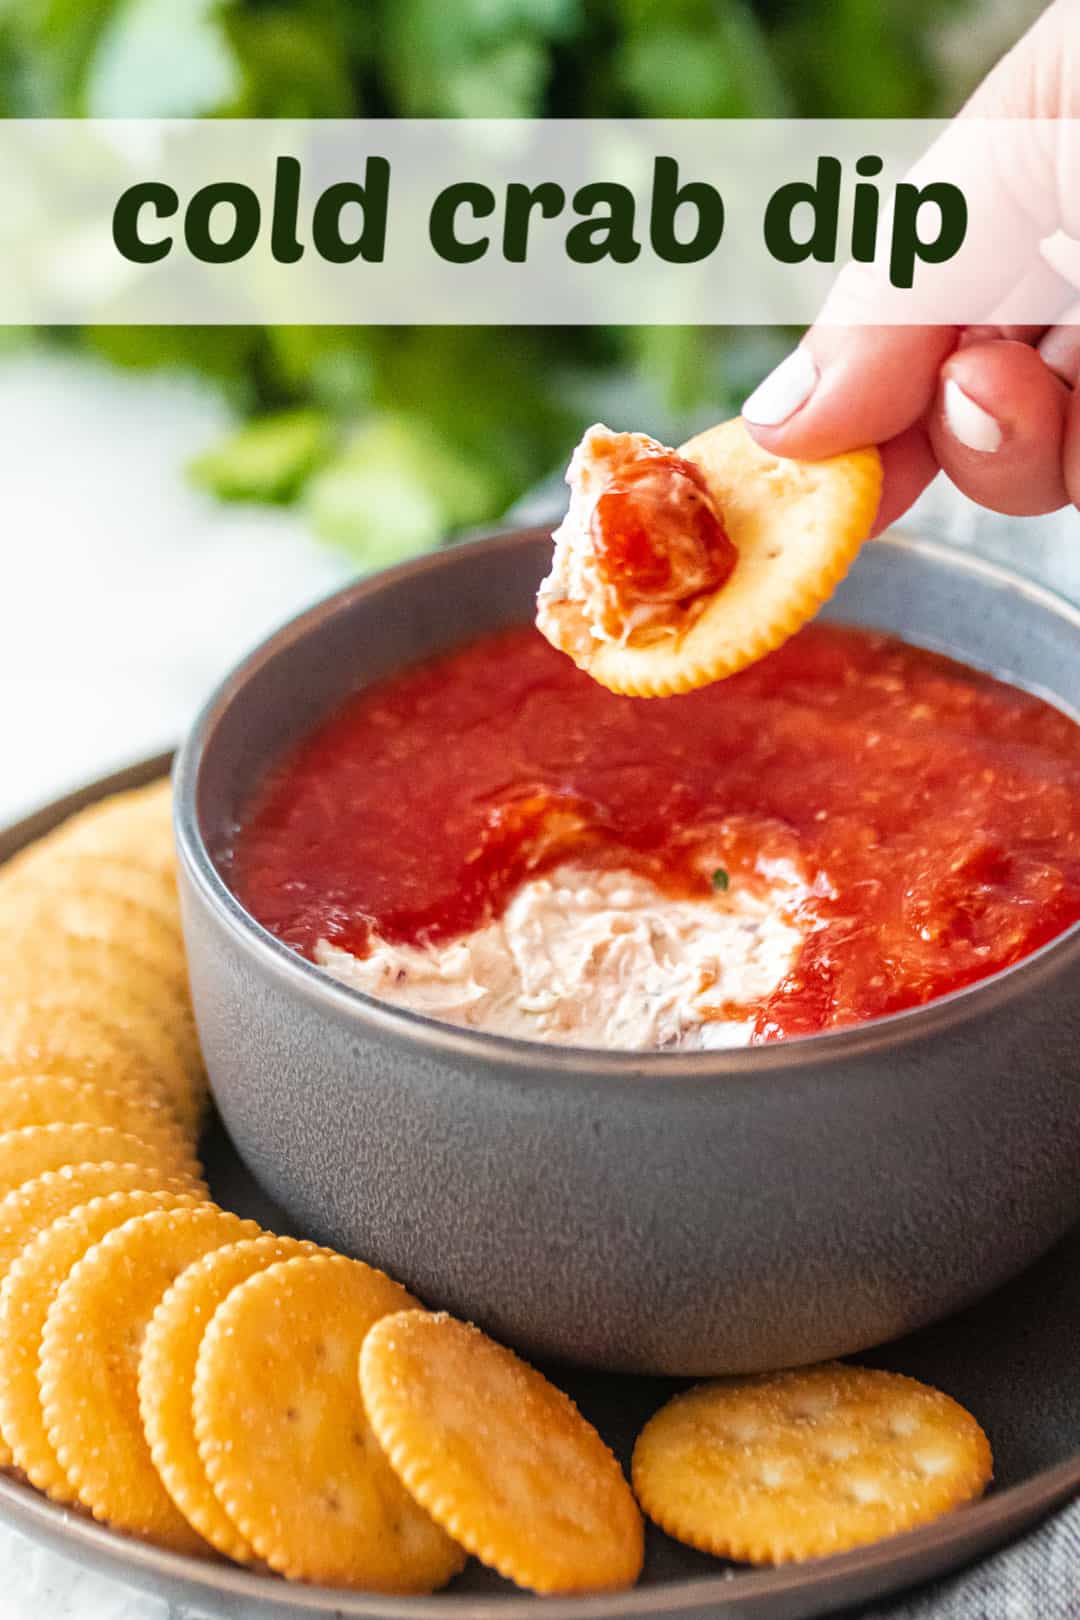 Dipping a cracker into a bowl of cold crab dip, with a text overlay above that reads "Cold Crab Dip."